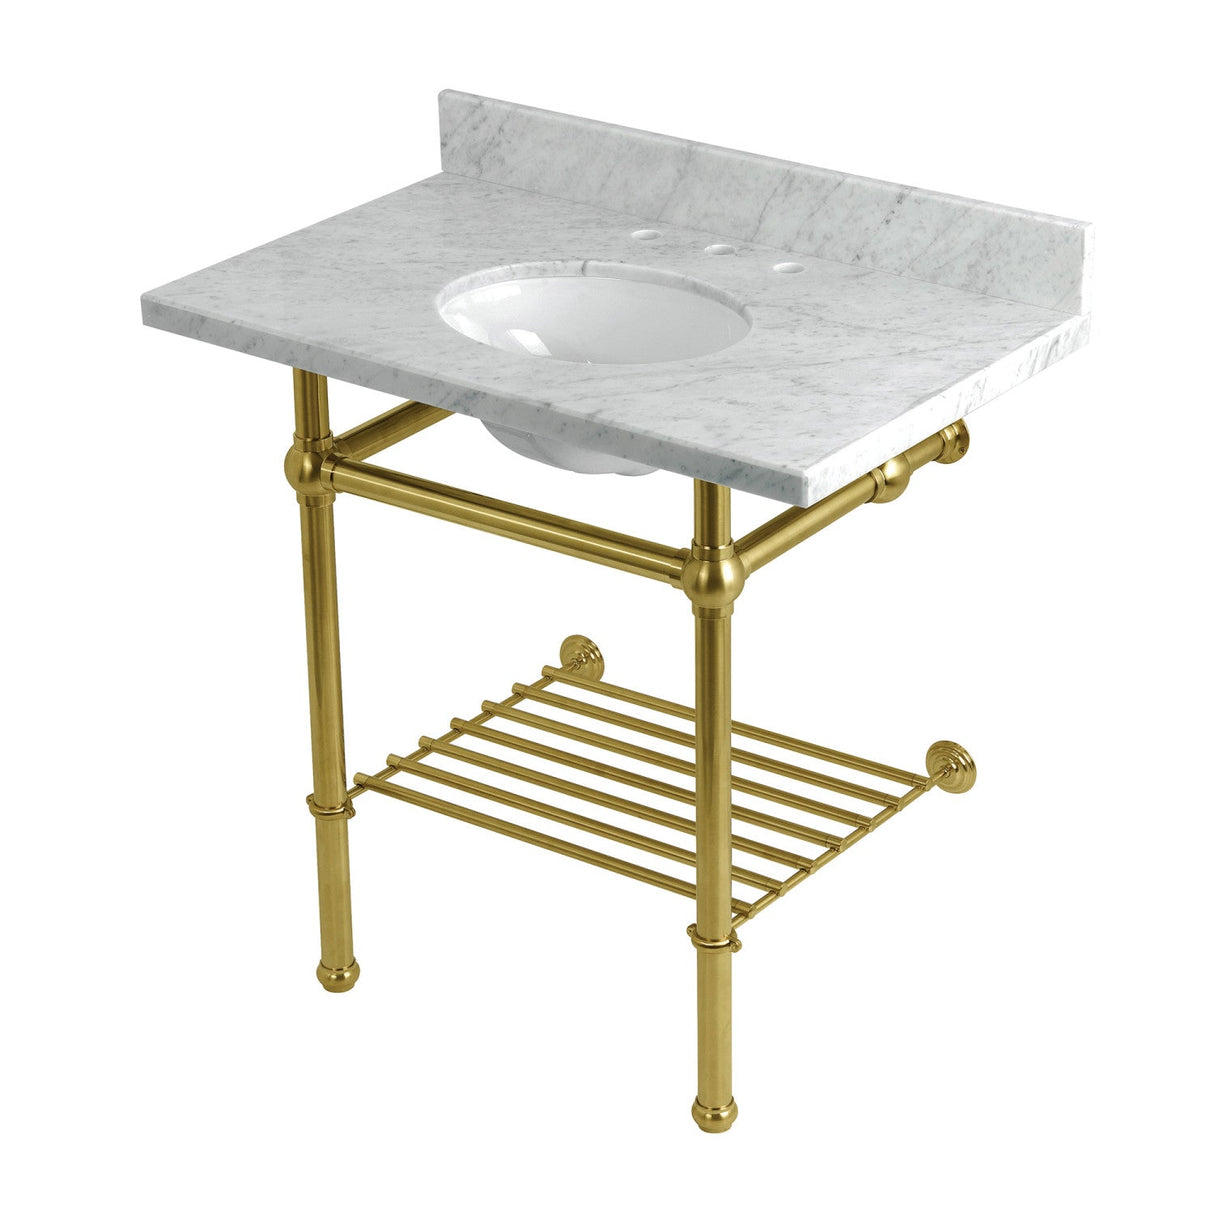 Templeton KVPB36MBB7 36-Inch Console Sink with Brass Legs (8-Inch, 3 Hole), Carrara Marble/Brushed Brass